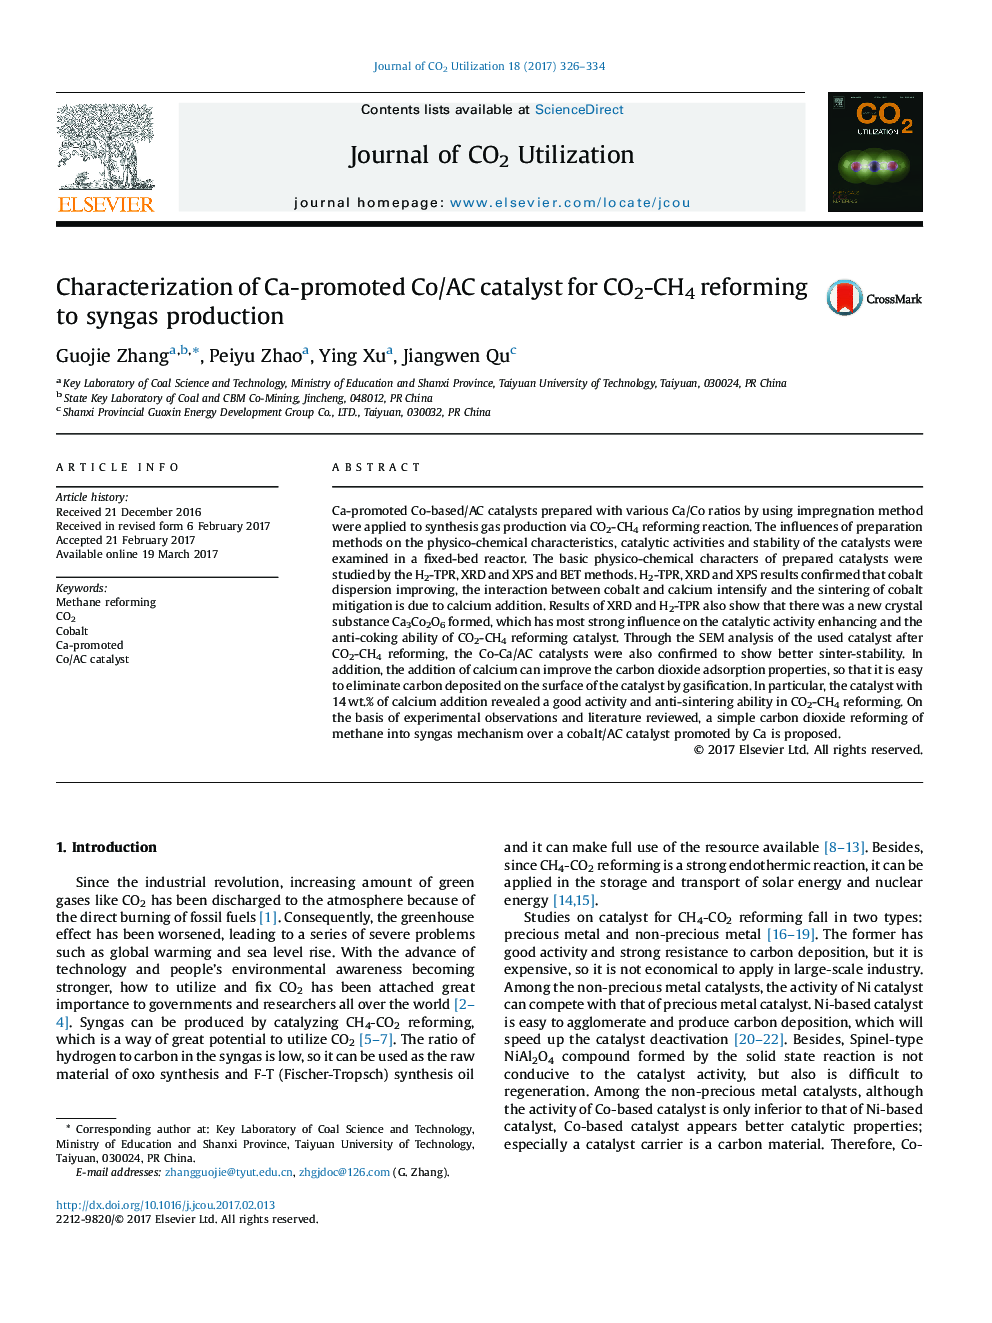 Characterization of Ca-promoted Co/AC catalyst for CO2-CH4 reforming to syngas production